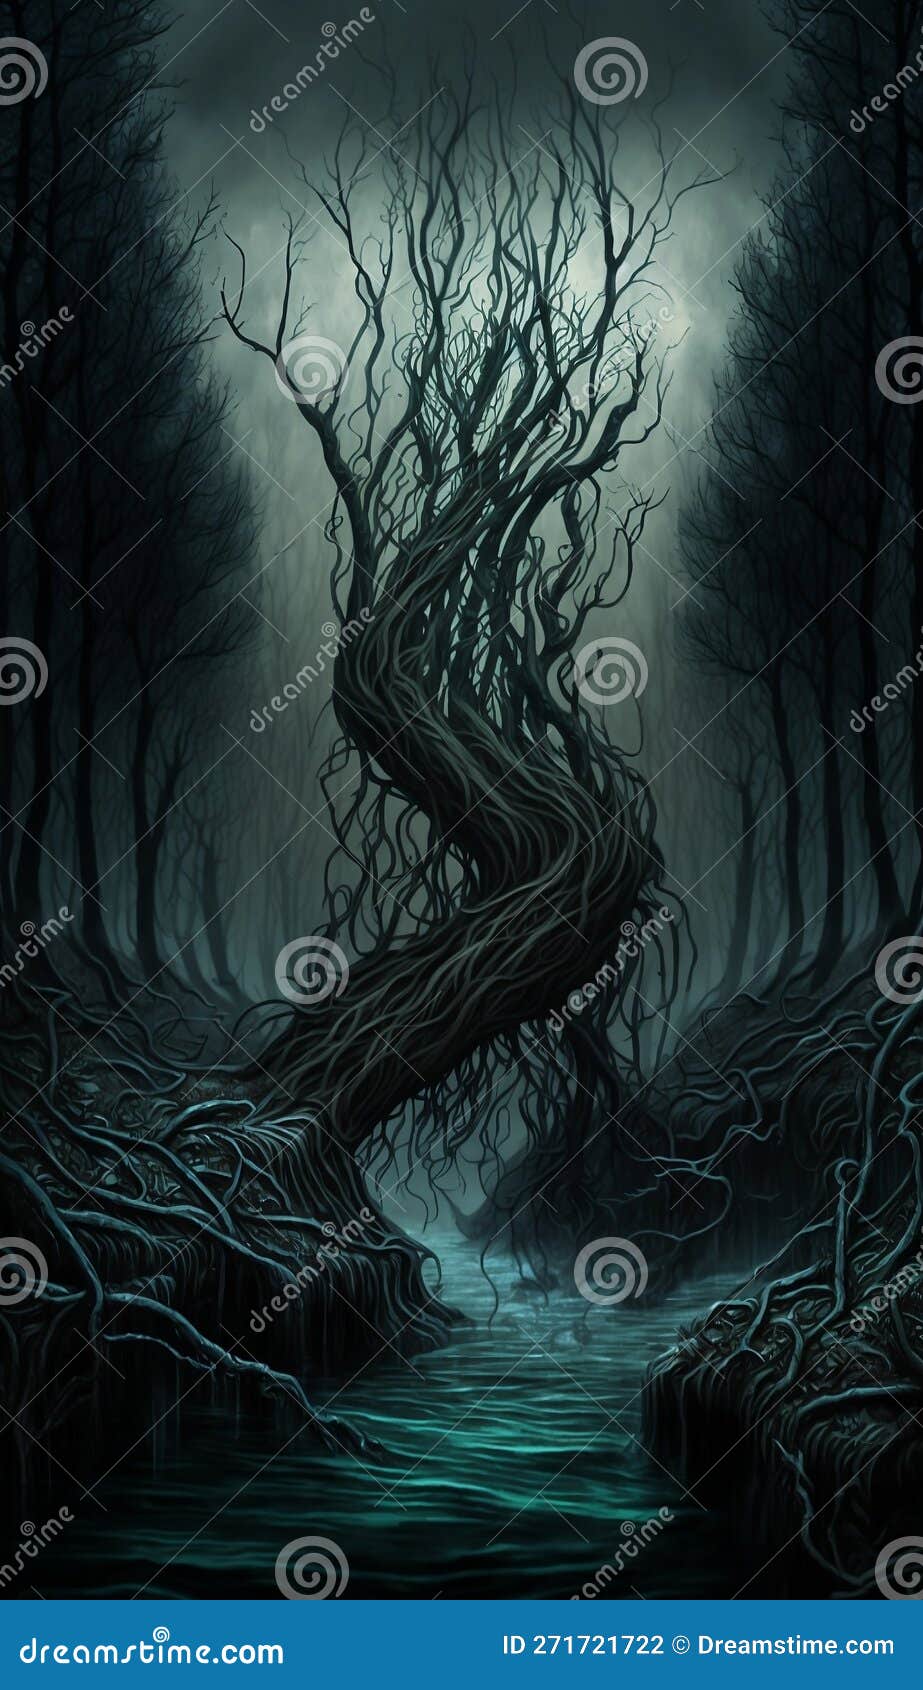 a surreal landscape, a tree and a river, dark and gloomy, with sinister trees